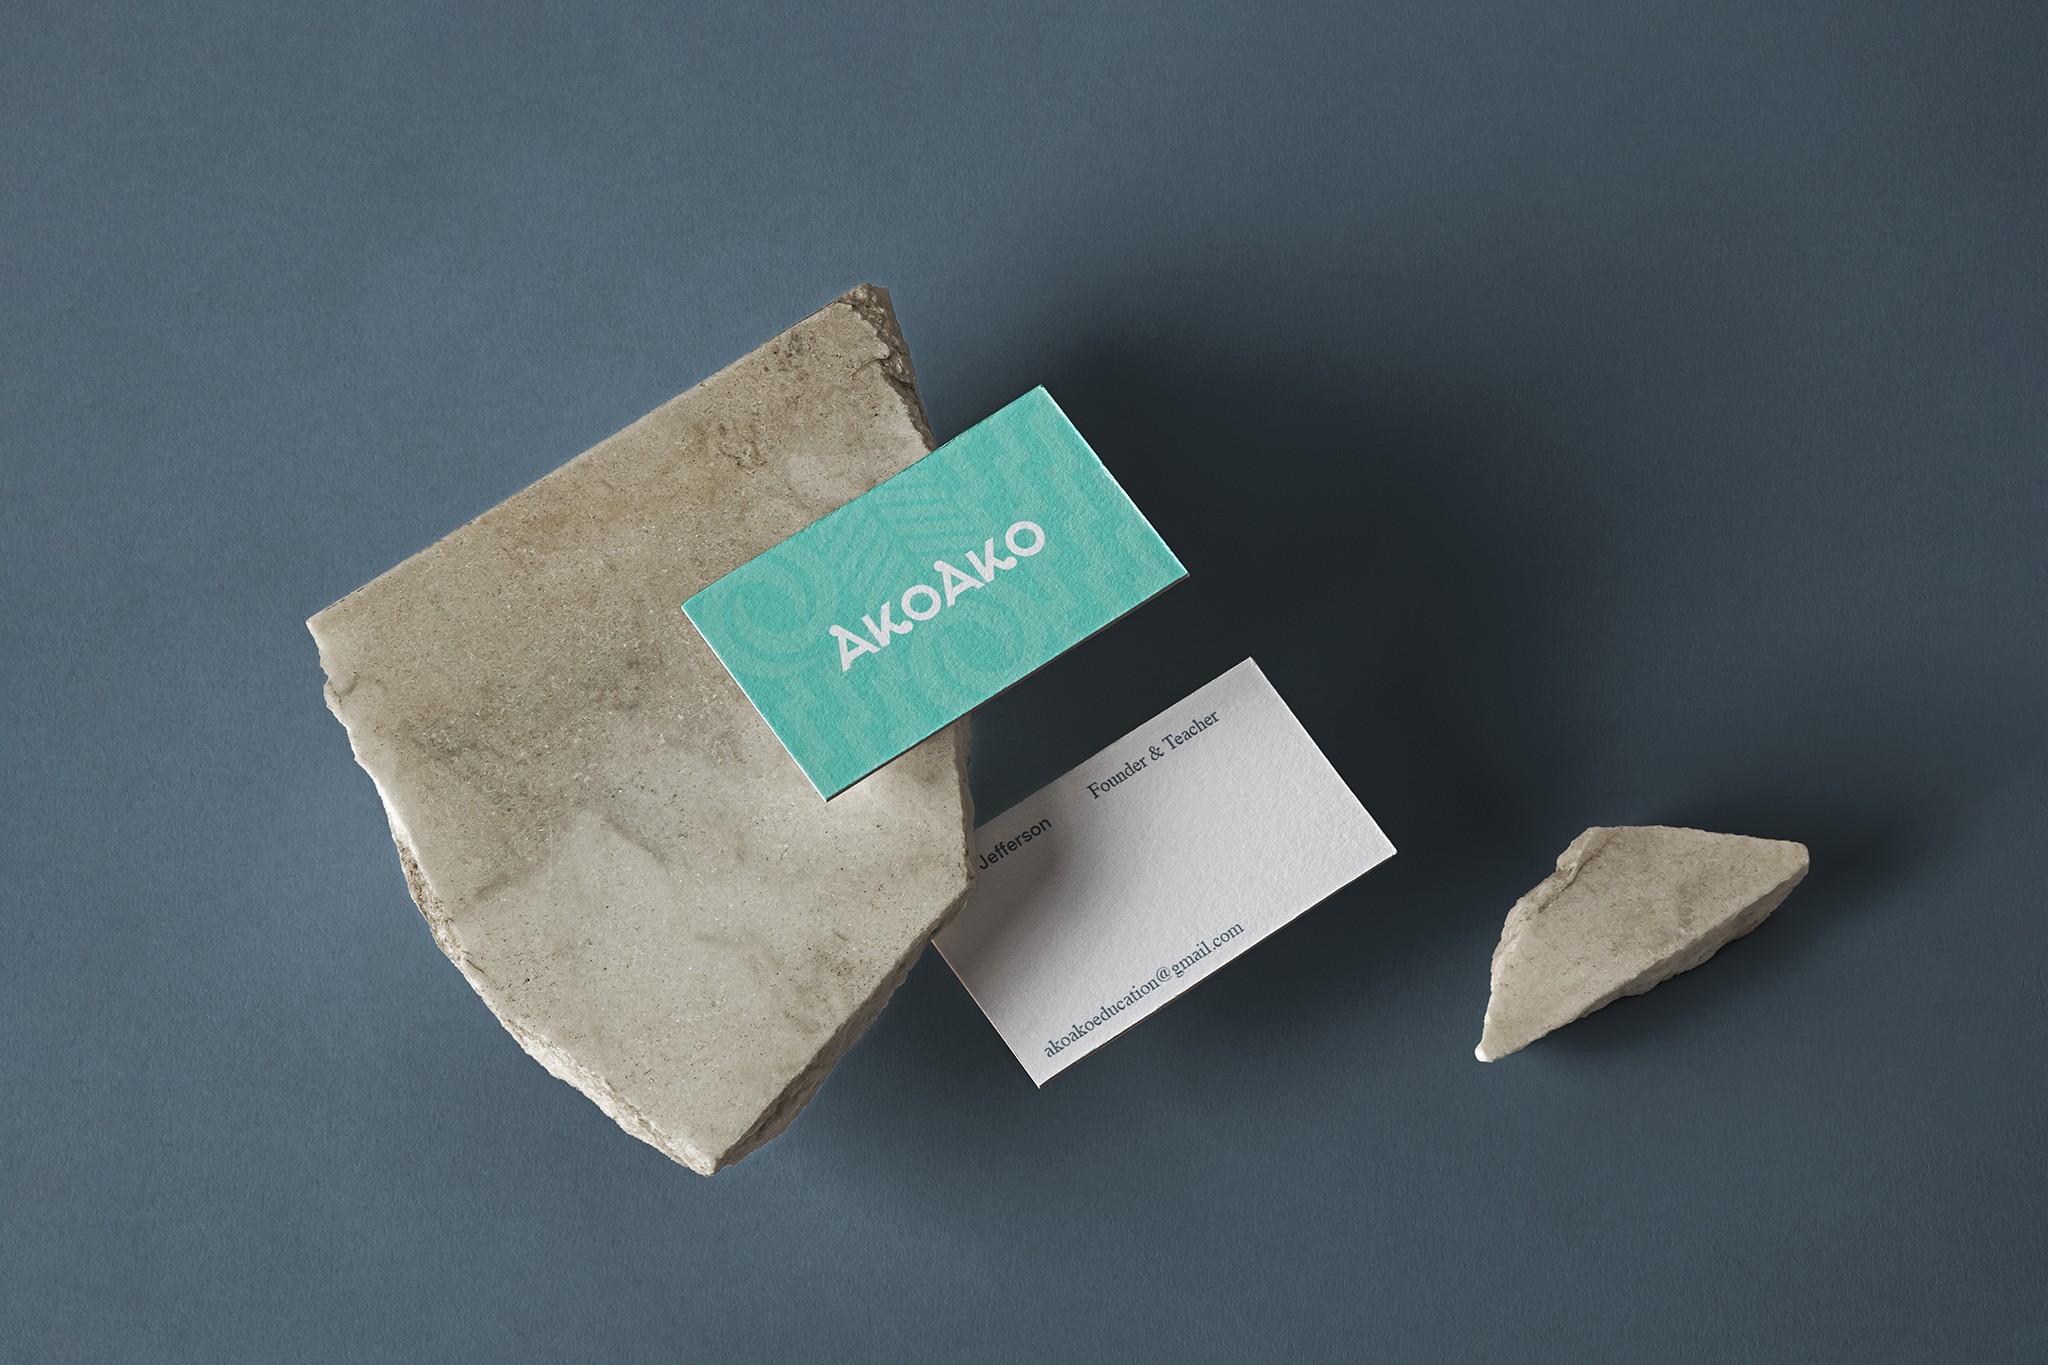 An image featuring two business cards for Akoako lying on a sandy-coloured rock. The cards feature a Maori pattern as the background, with the Akoako logo centred on each card. The use of the Maori pattern adds a sense of cultural significance and uniqueness to the design, while the sandy-coloured rock adds a natural and organic element to the overall composition. The image serves as a visual representation of the brand's aesthetic.